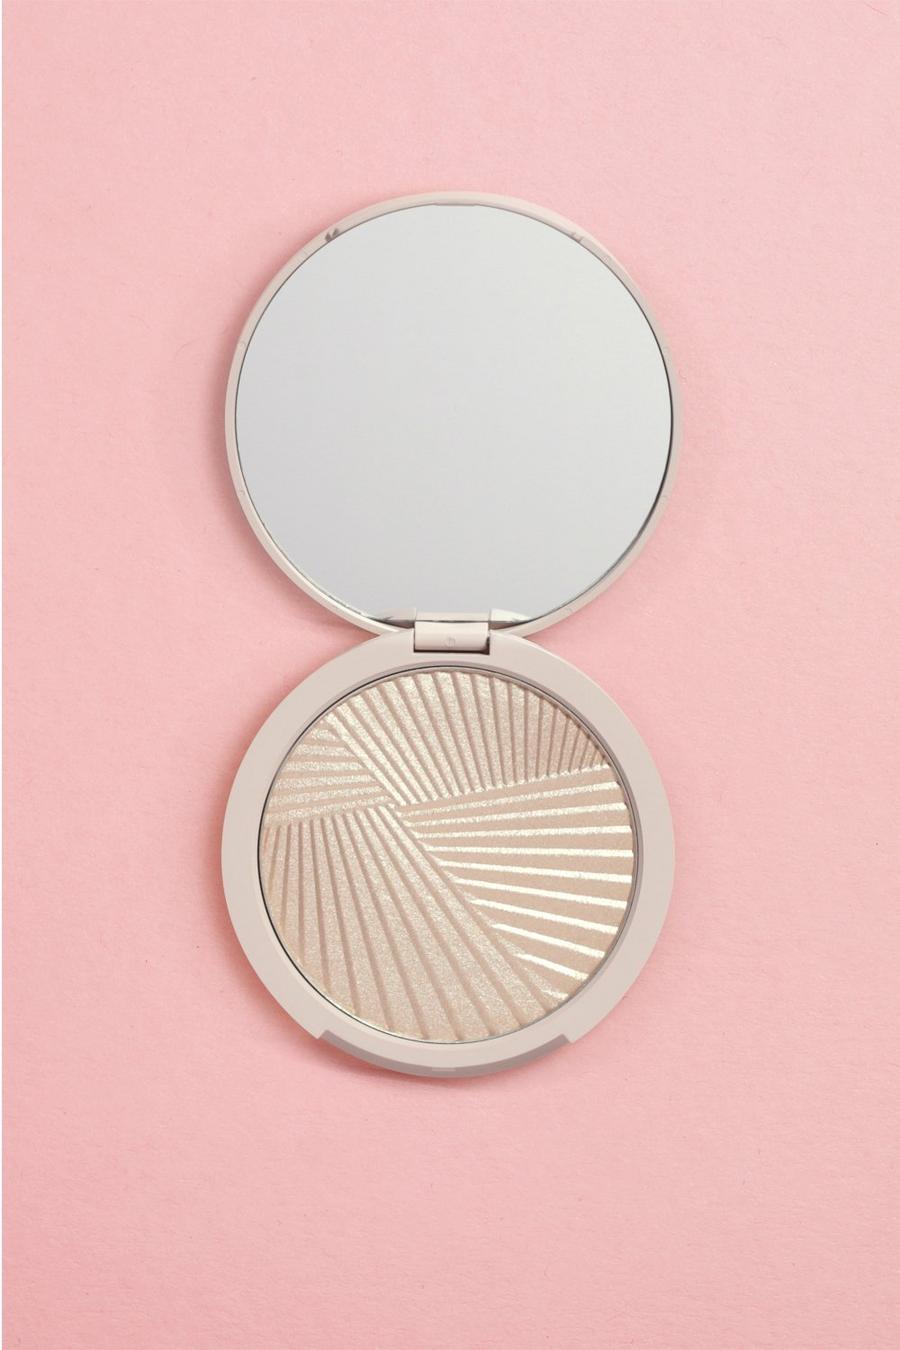 Boohoo Beauty Face & Body Highlighter Puder mit Spiegel, Nude